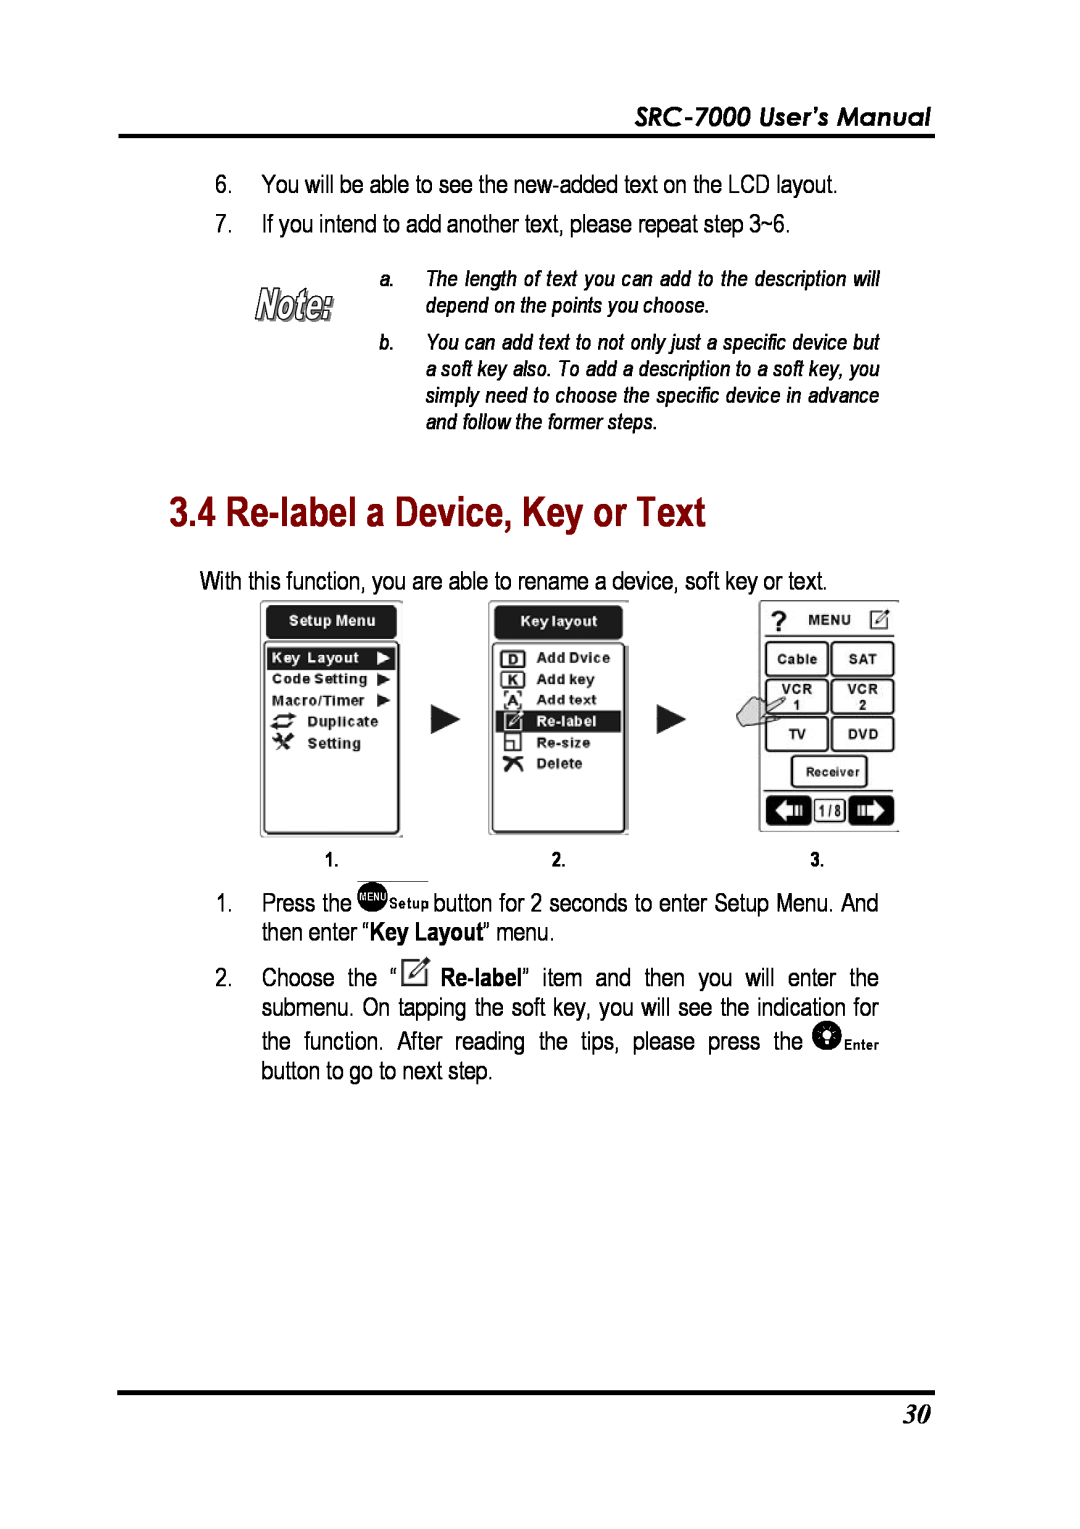 Sunwave Tech manual Re-label a Device, Key or Text, SRC-7000 User’s Manual 